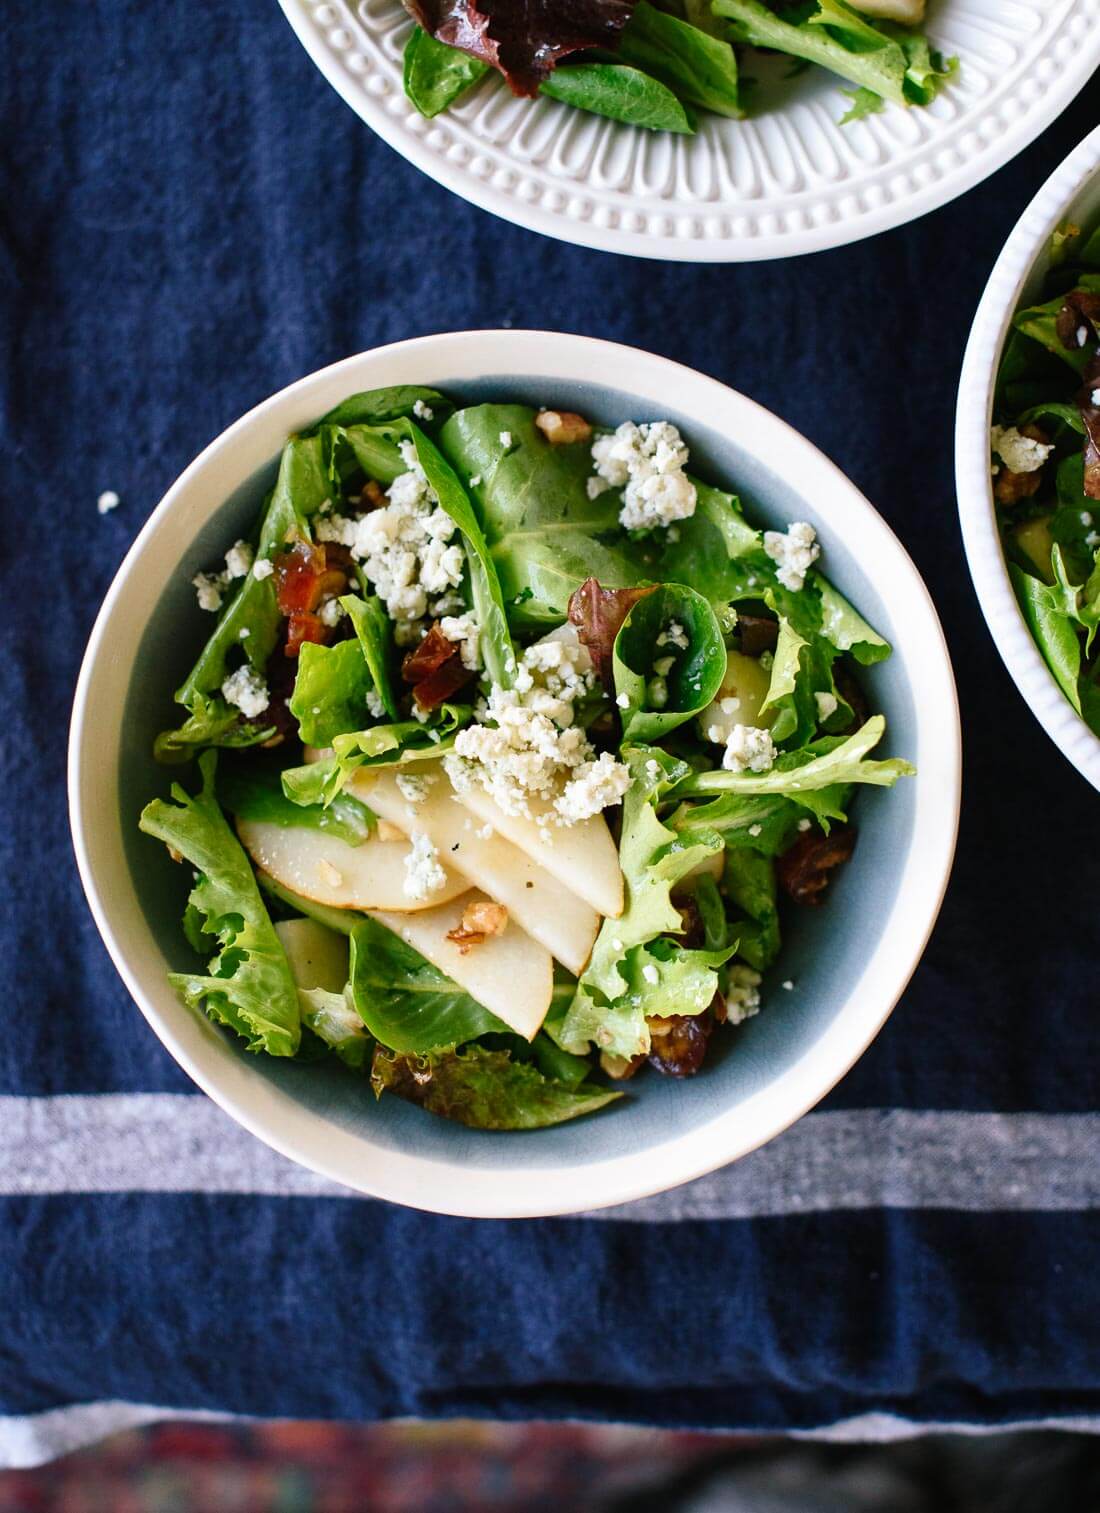 This fresh green salad with pears, walnuts, dates and blue cheese is a fresh option for your holiday table! cookieandkate.com